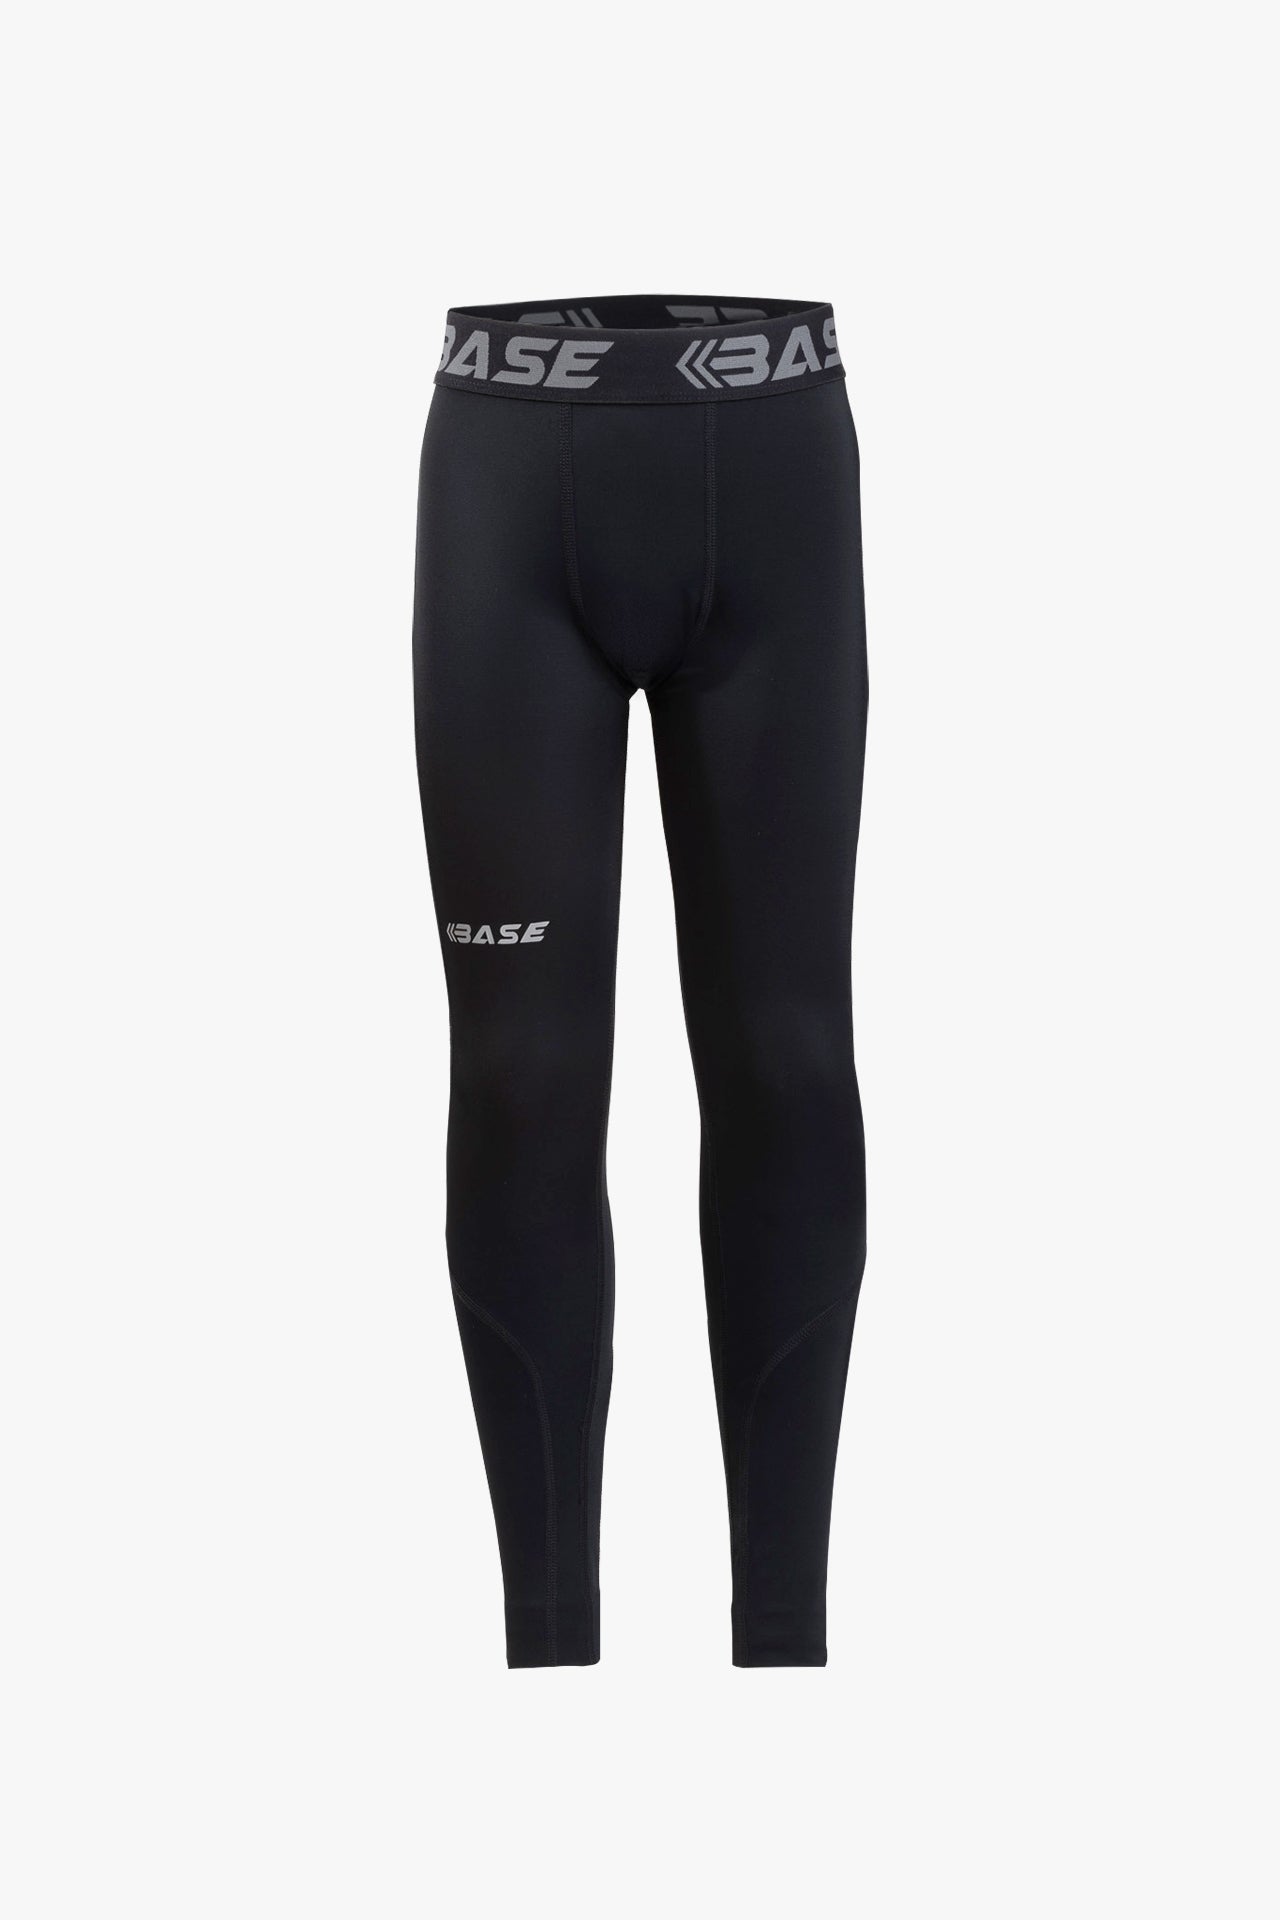 BASE Youth Compression Tights - Black